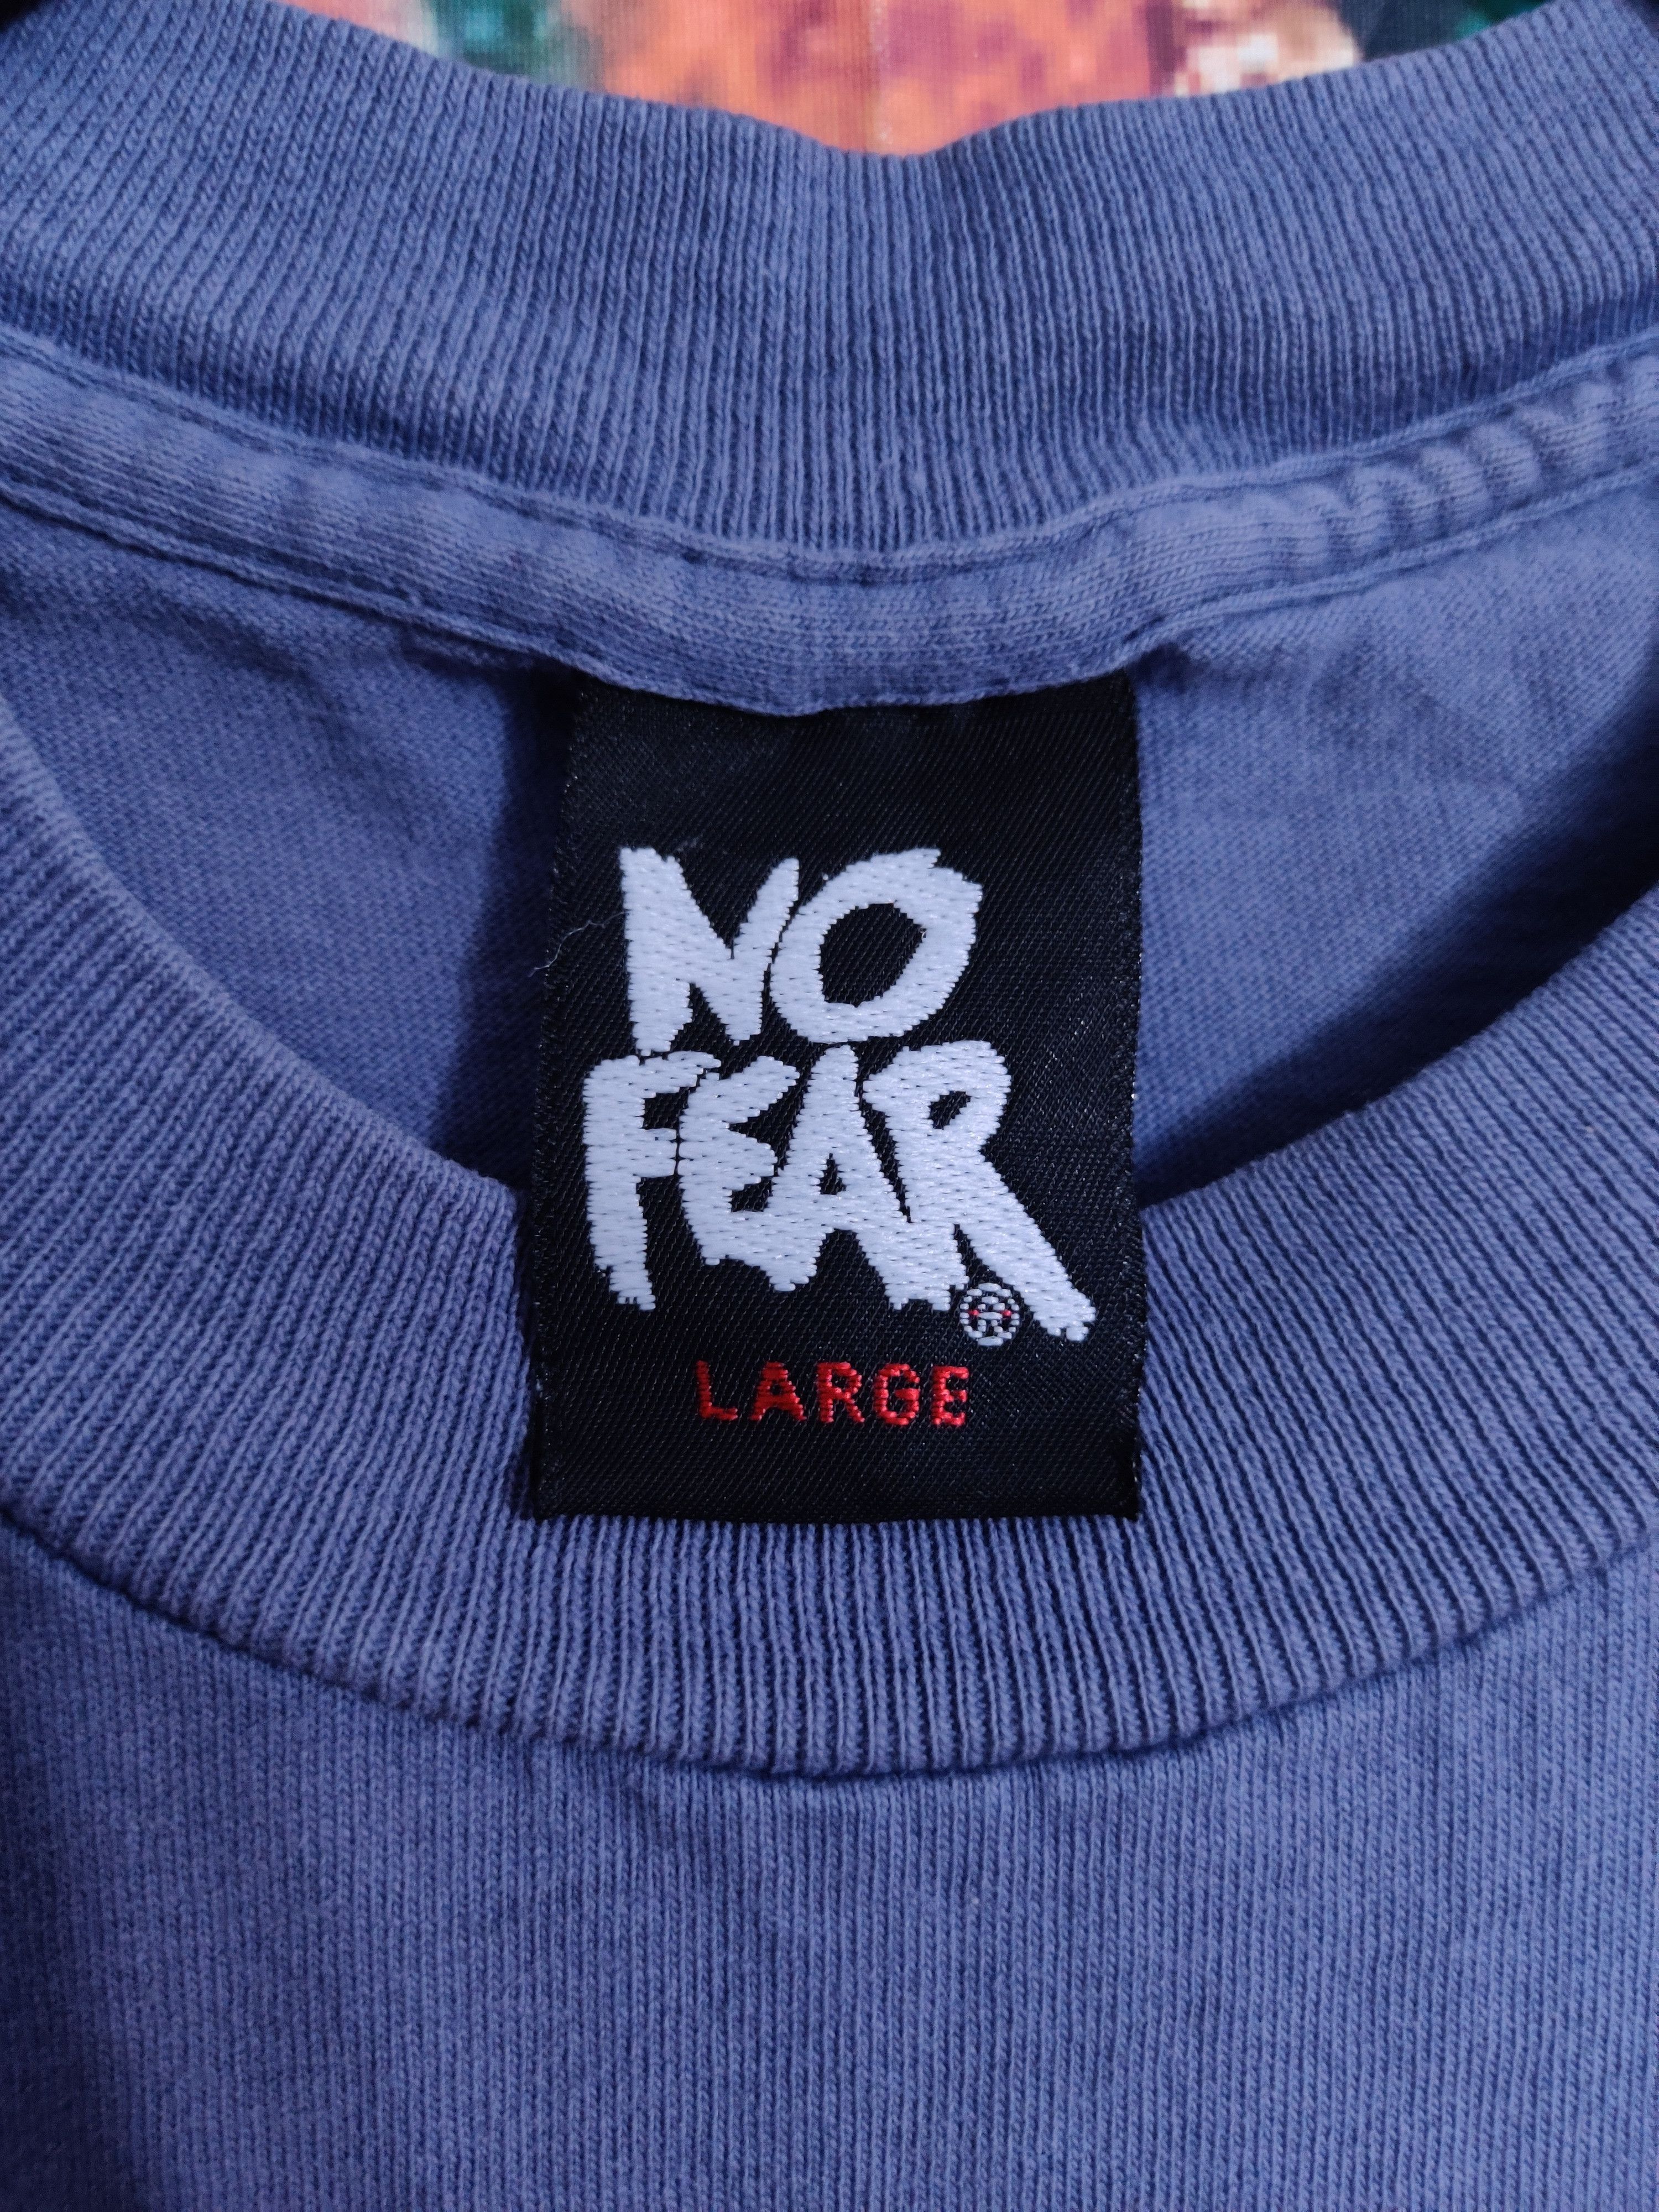 Vintage Vintage No Fear Second Place First Loser Single Stitched Tee Size US L / EU 52-54 / 3 - 3 Thumbnail